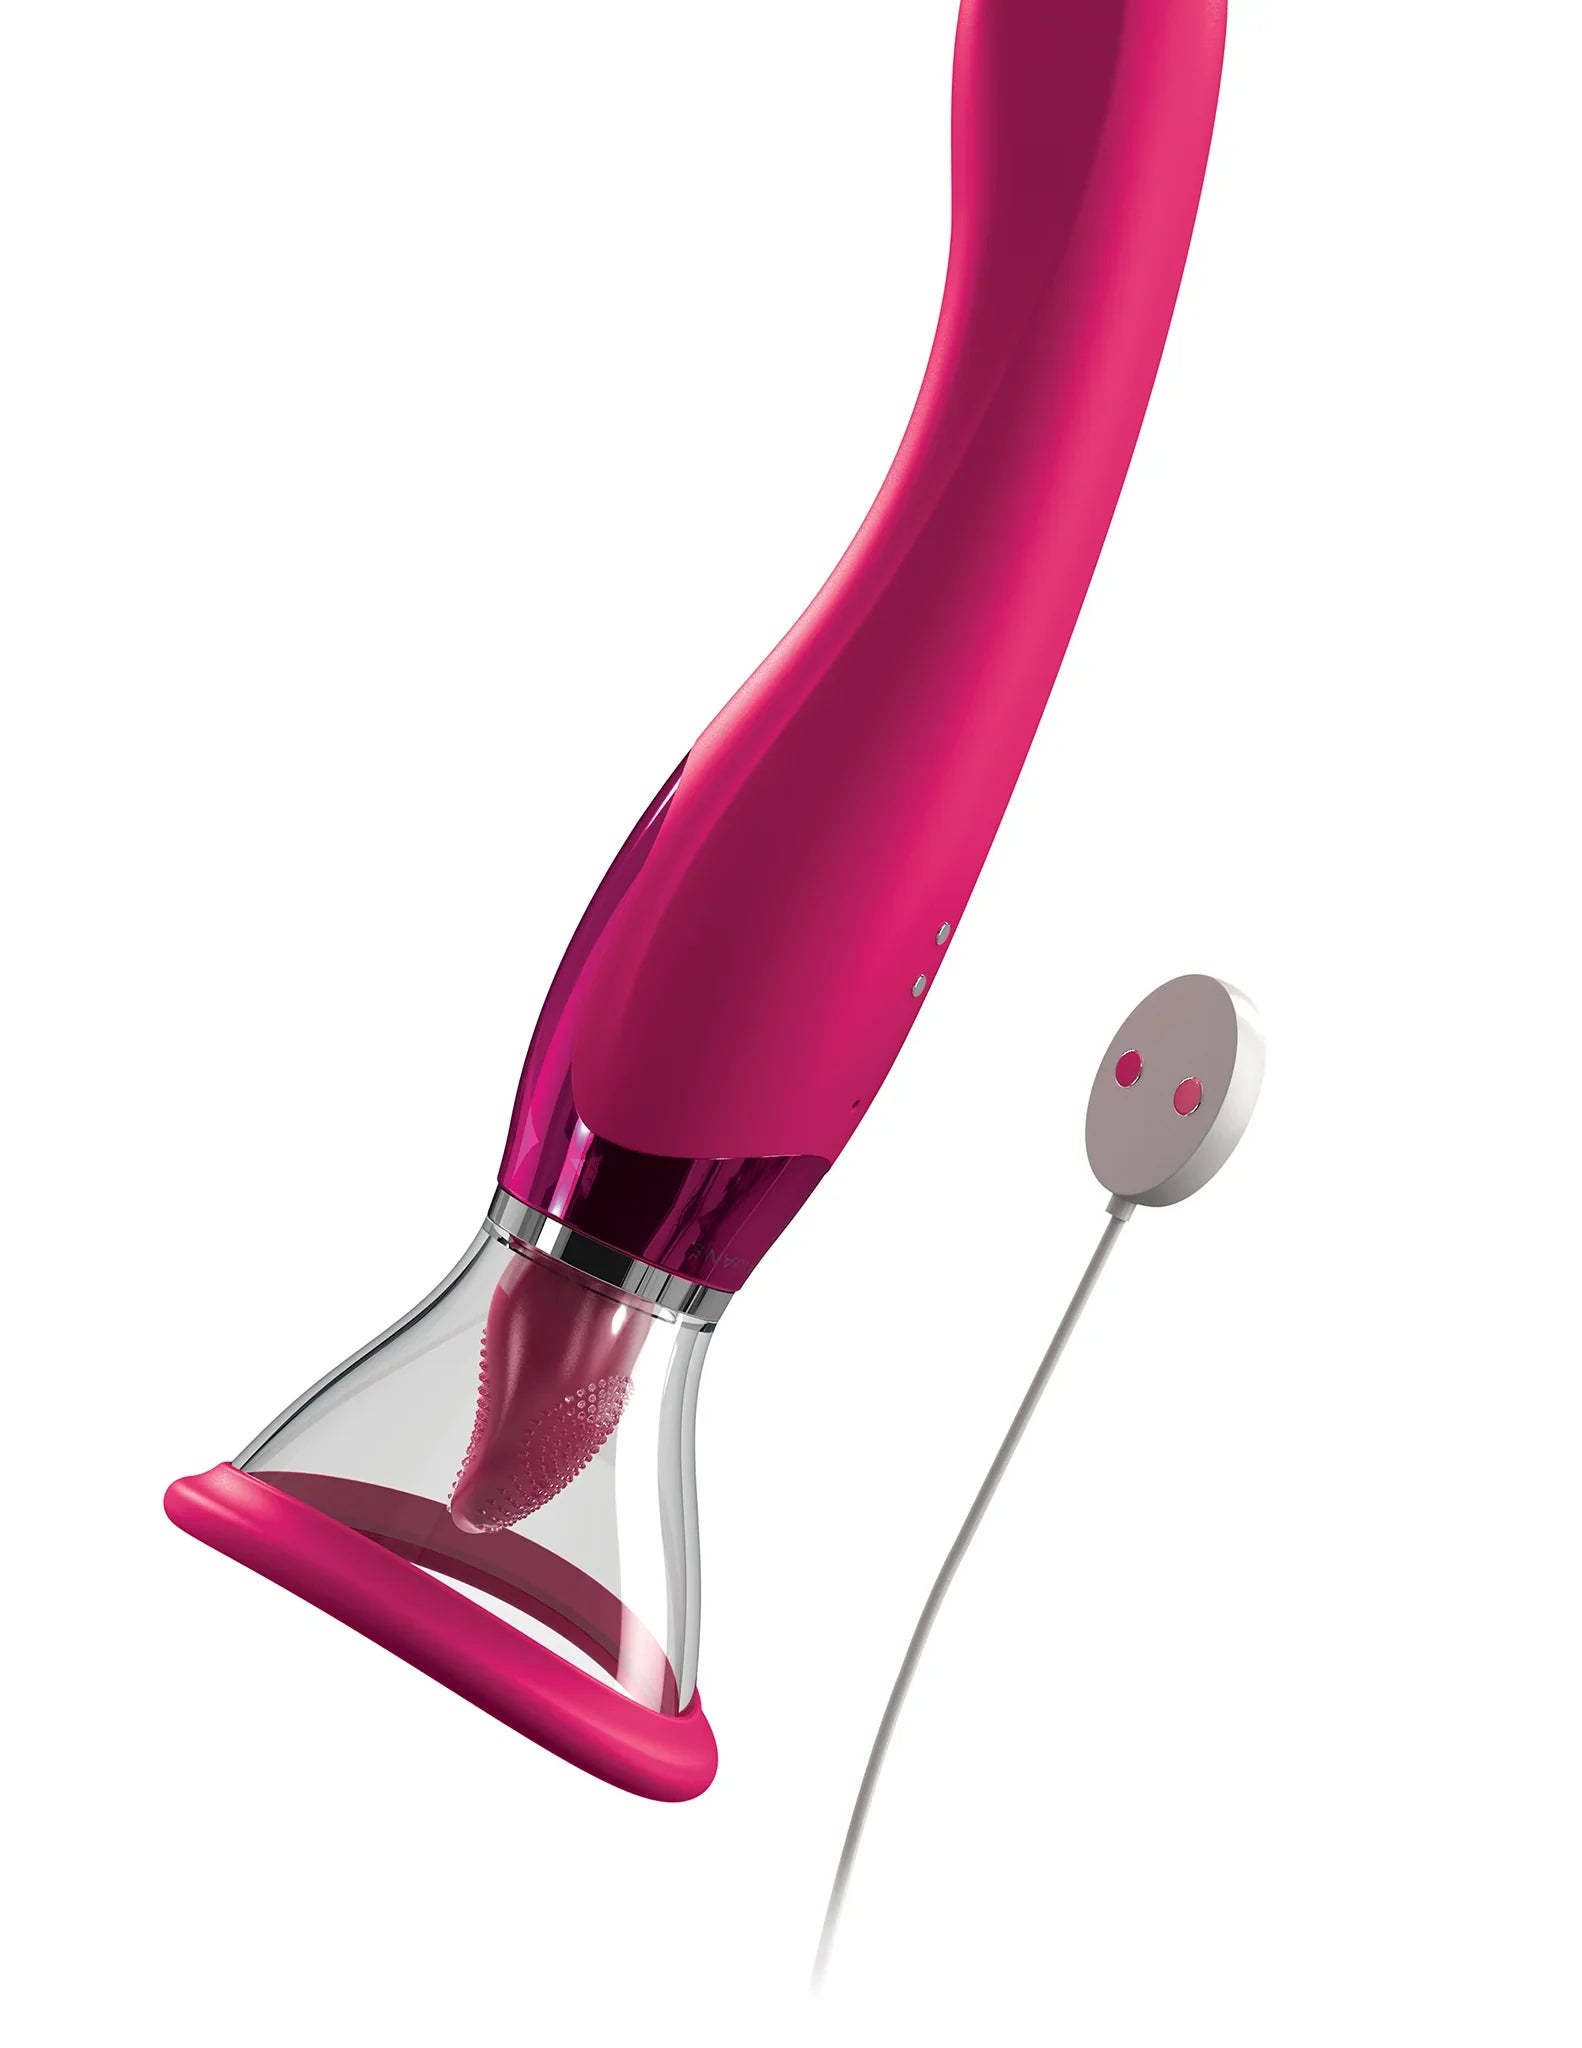 Apex vulva suction, clitoral and g-spot stimulator in JJ-pink coral with USB magnetic charger